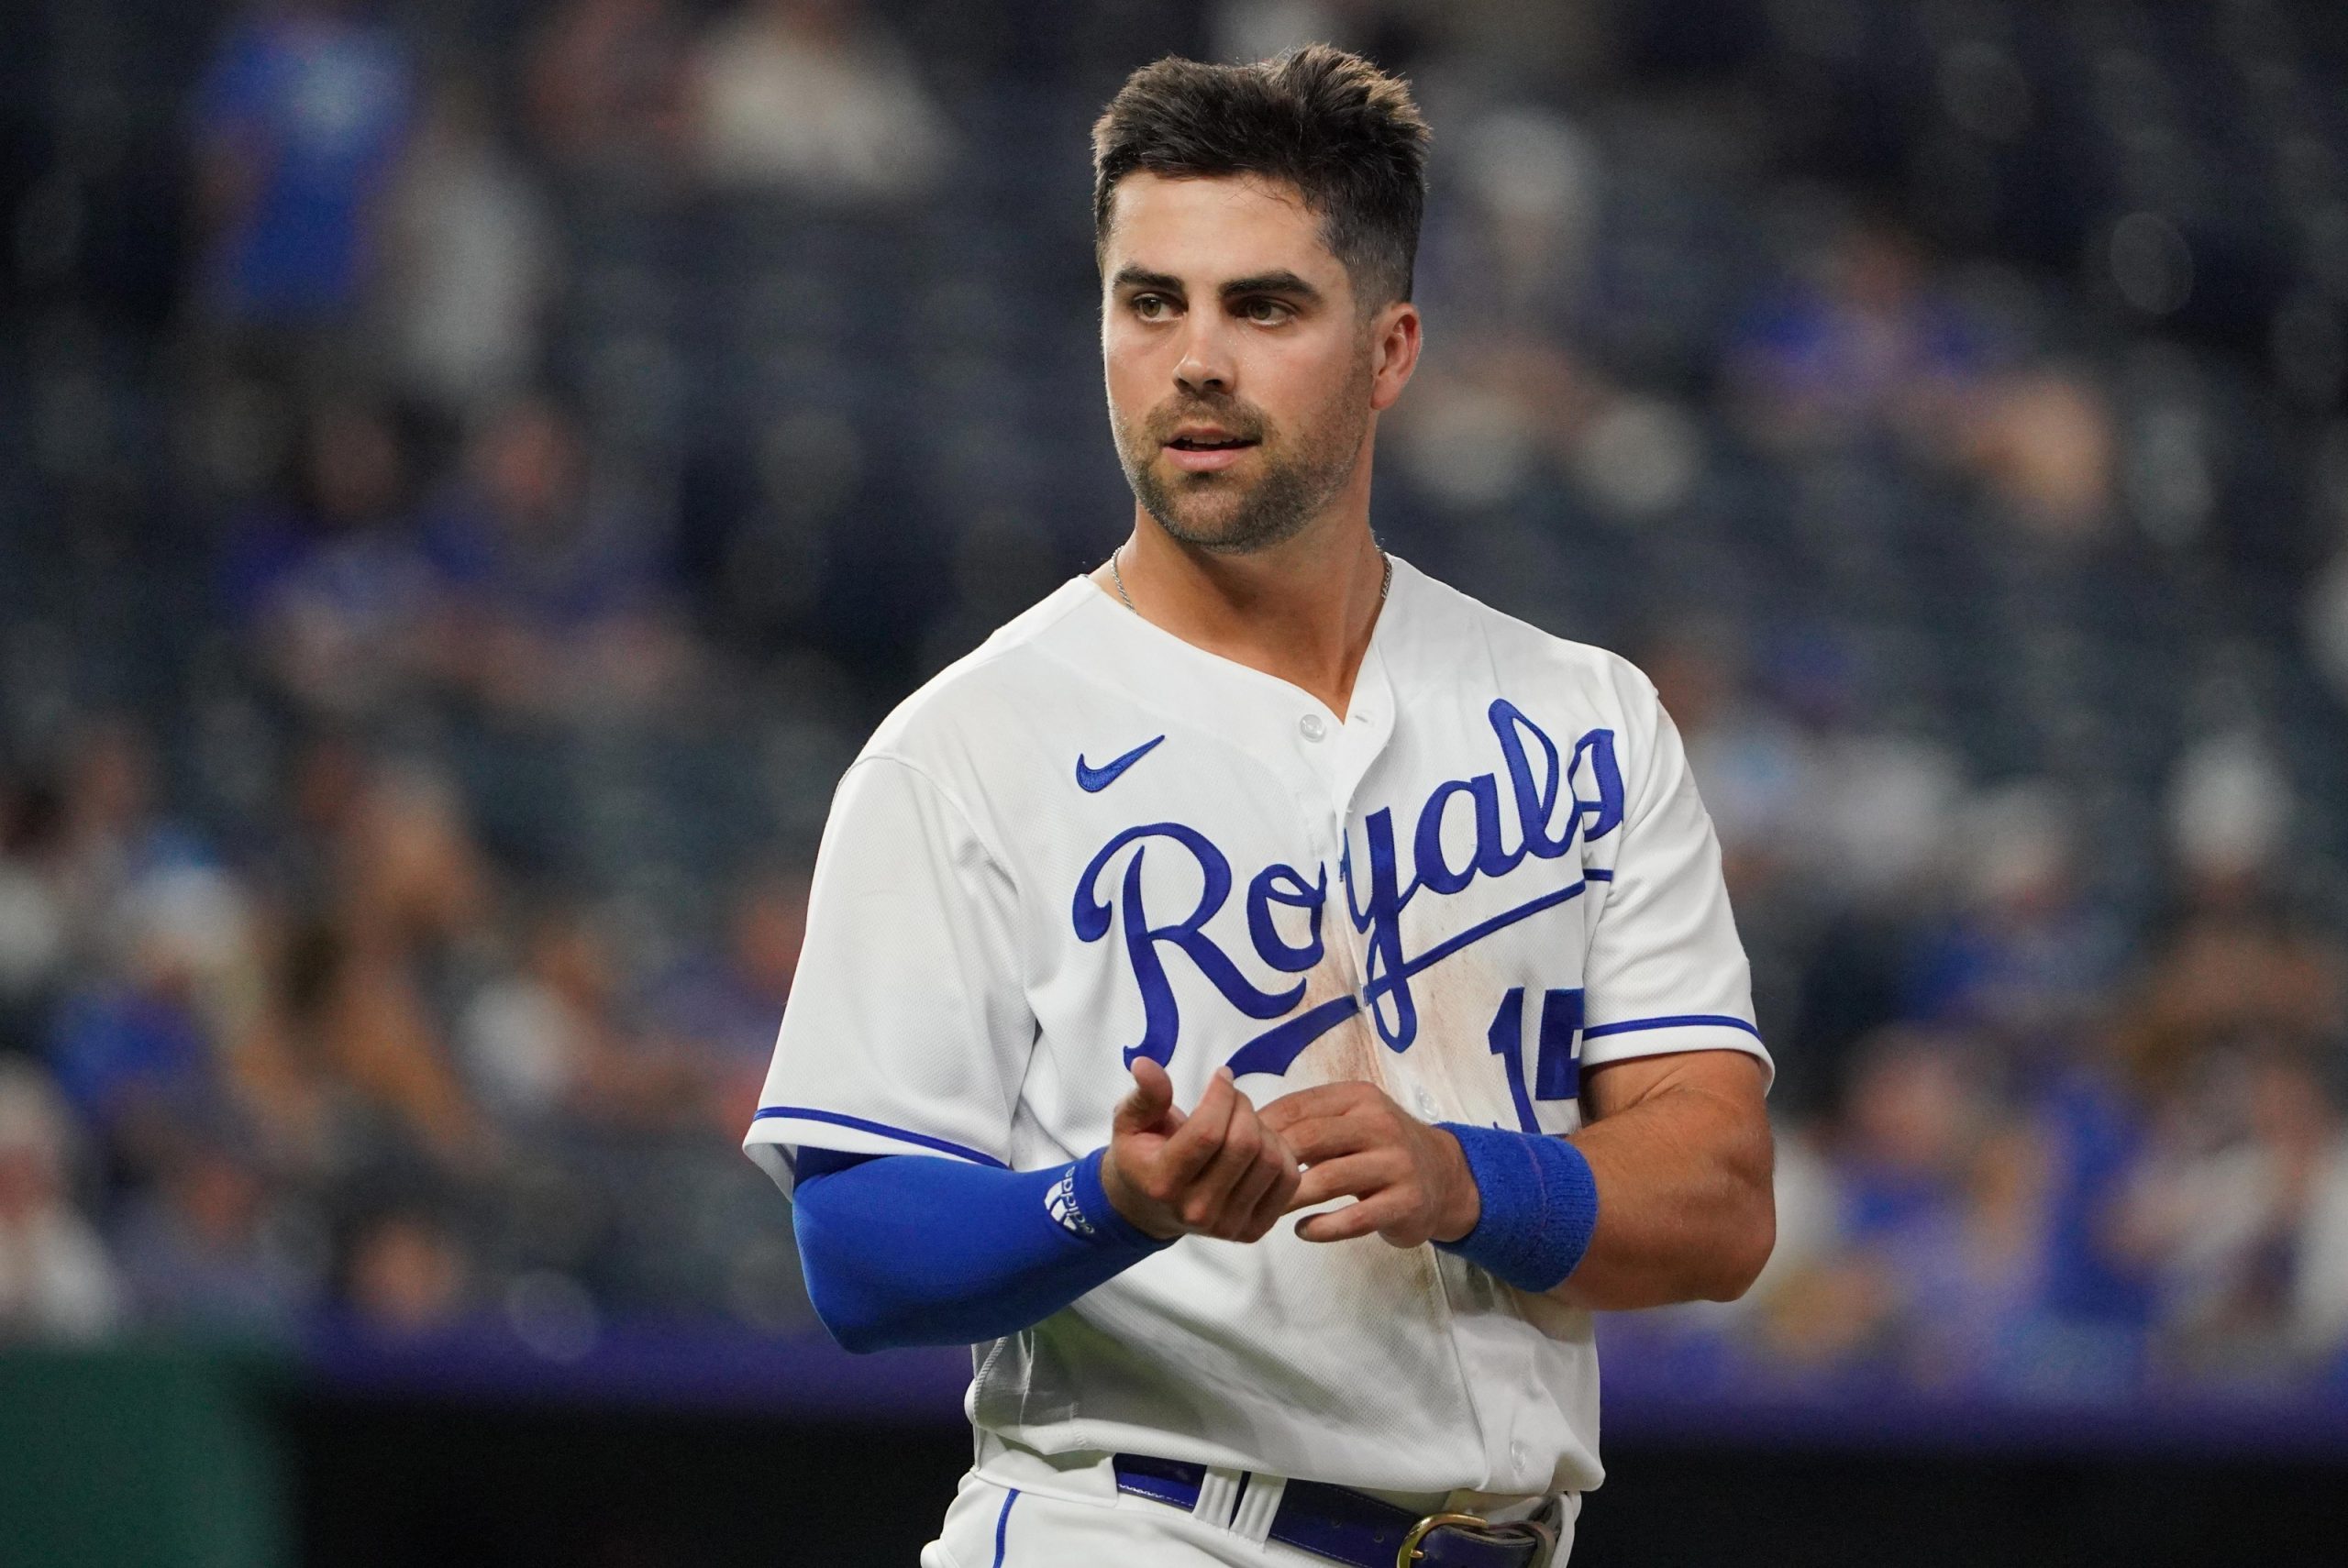 Did Whit Merrifield Get Married? Whit Merrifield's Personal Life